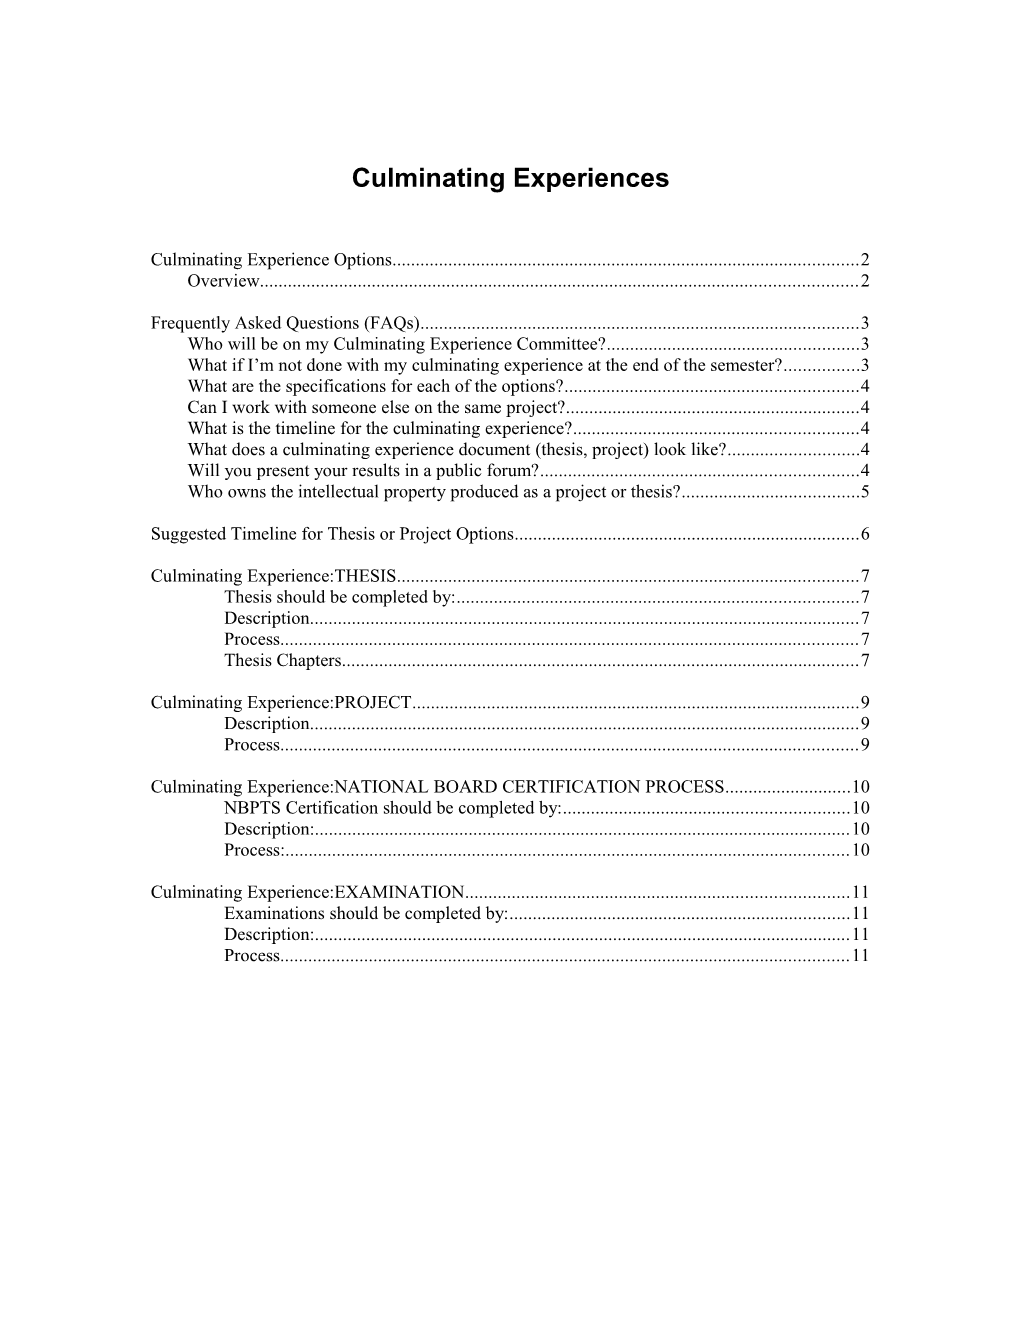 MA in Education Culminating Experiences